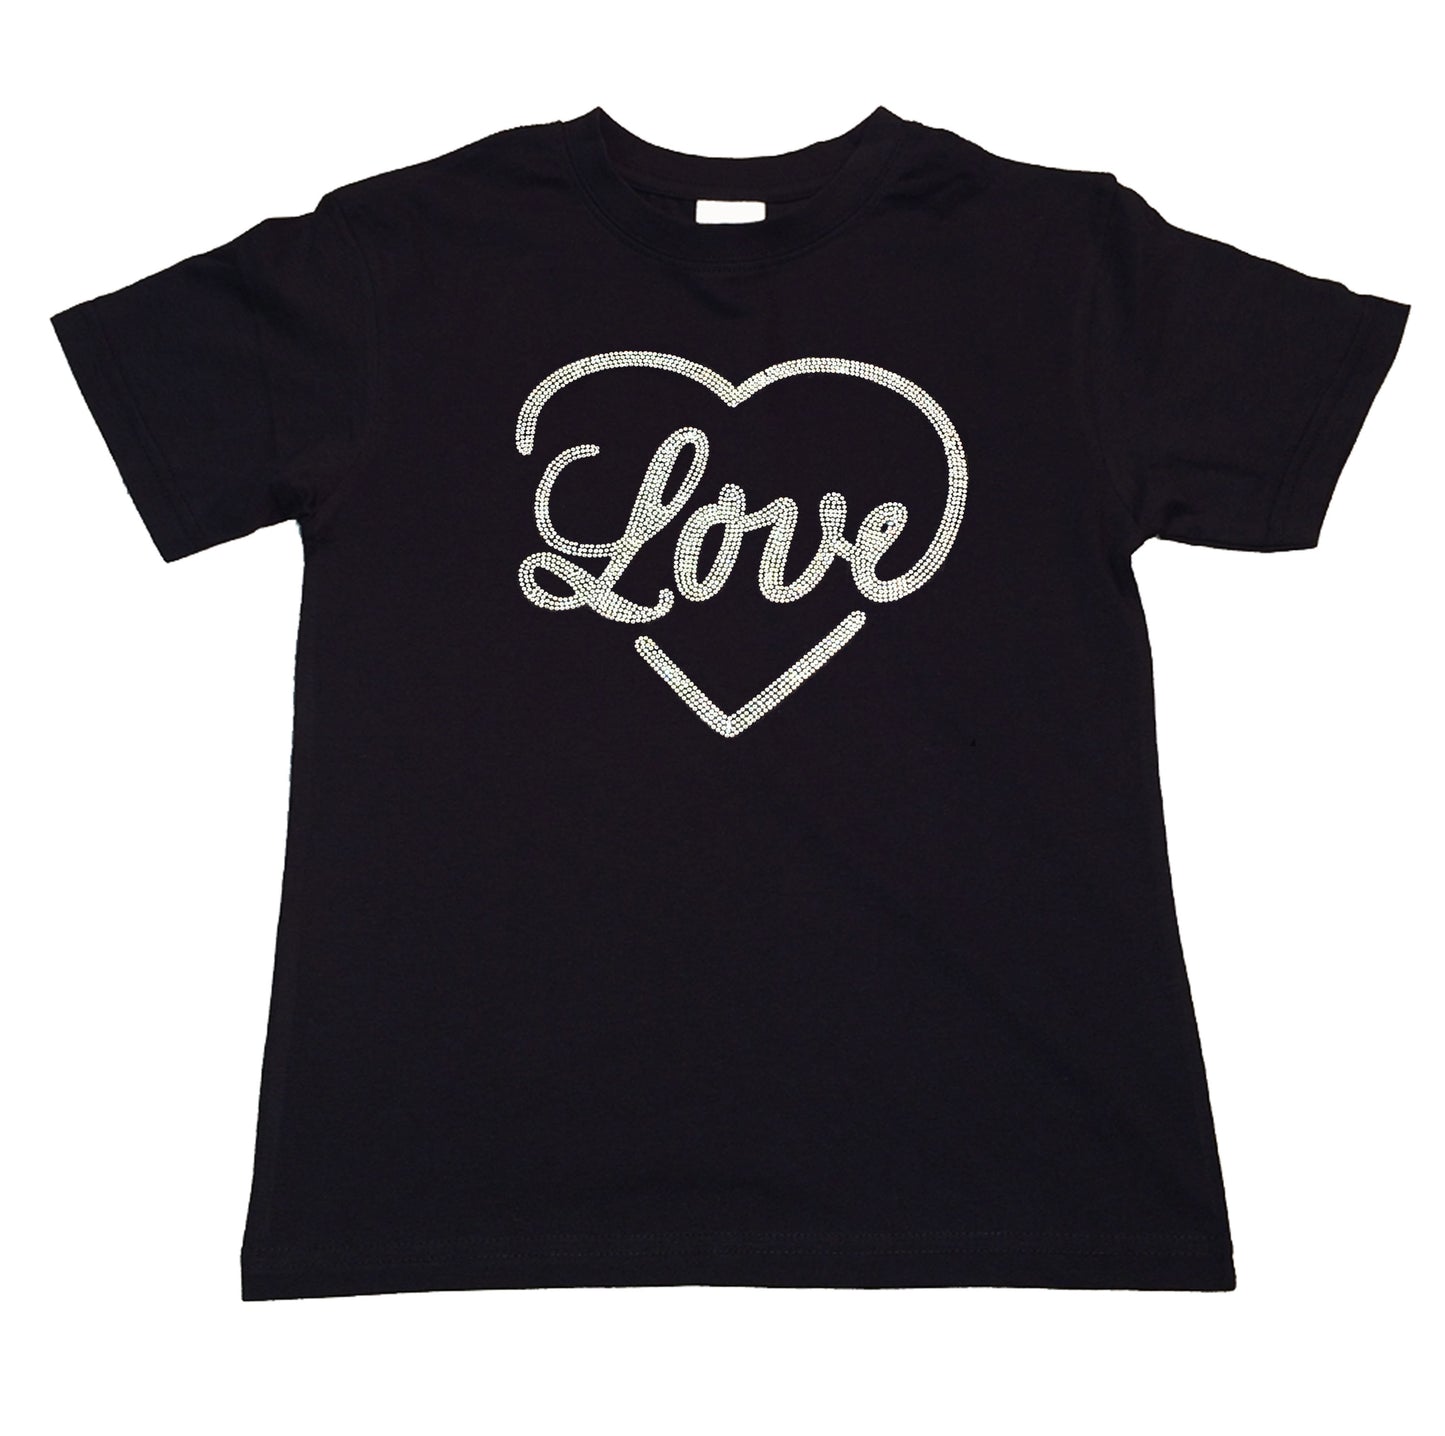 Girls Rhinestone T-Shirt " Love Heart in AB " Kids Size 3 to 14 Available